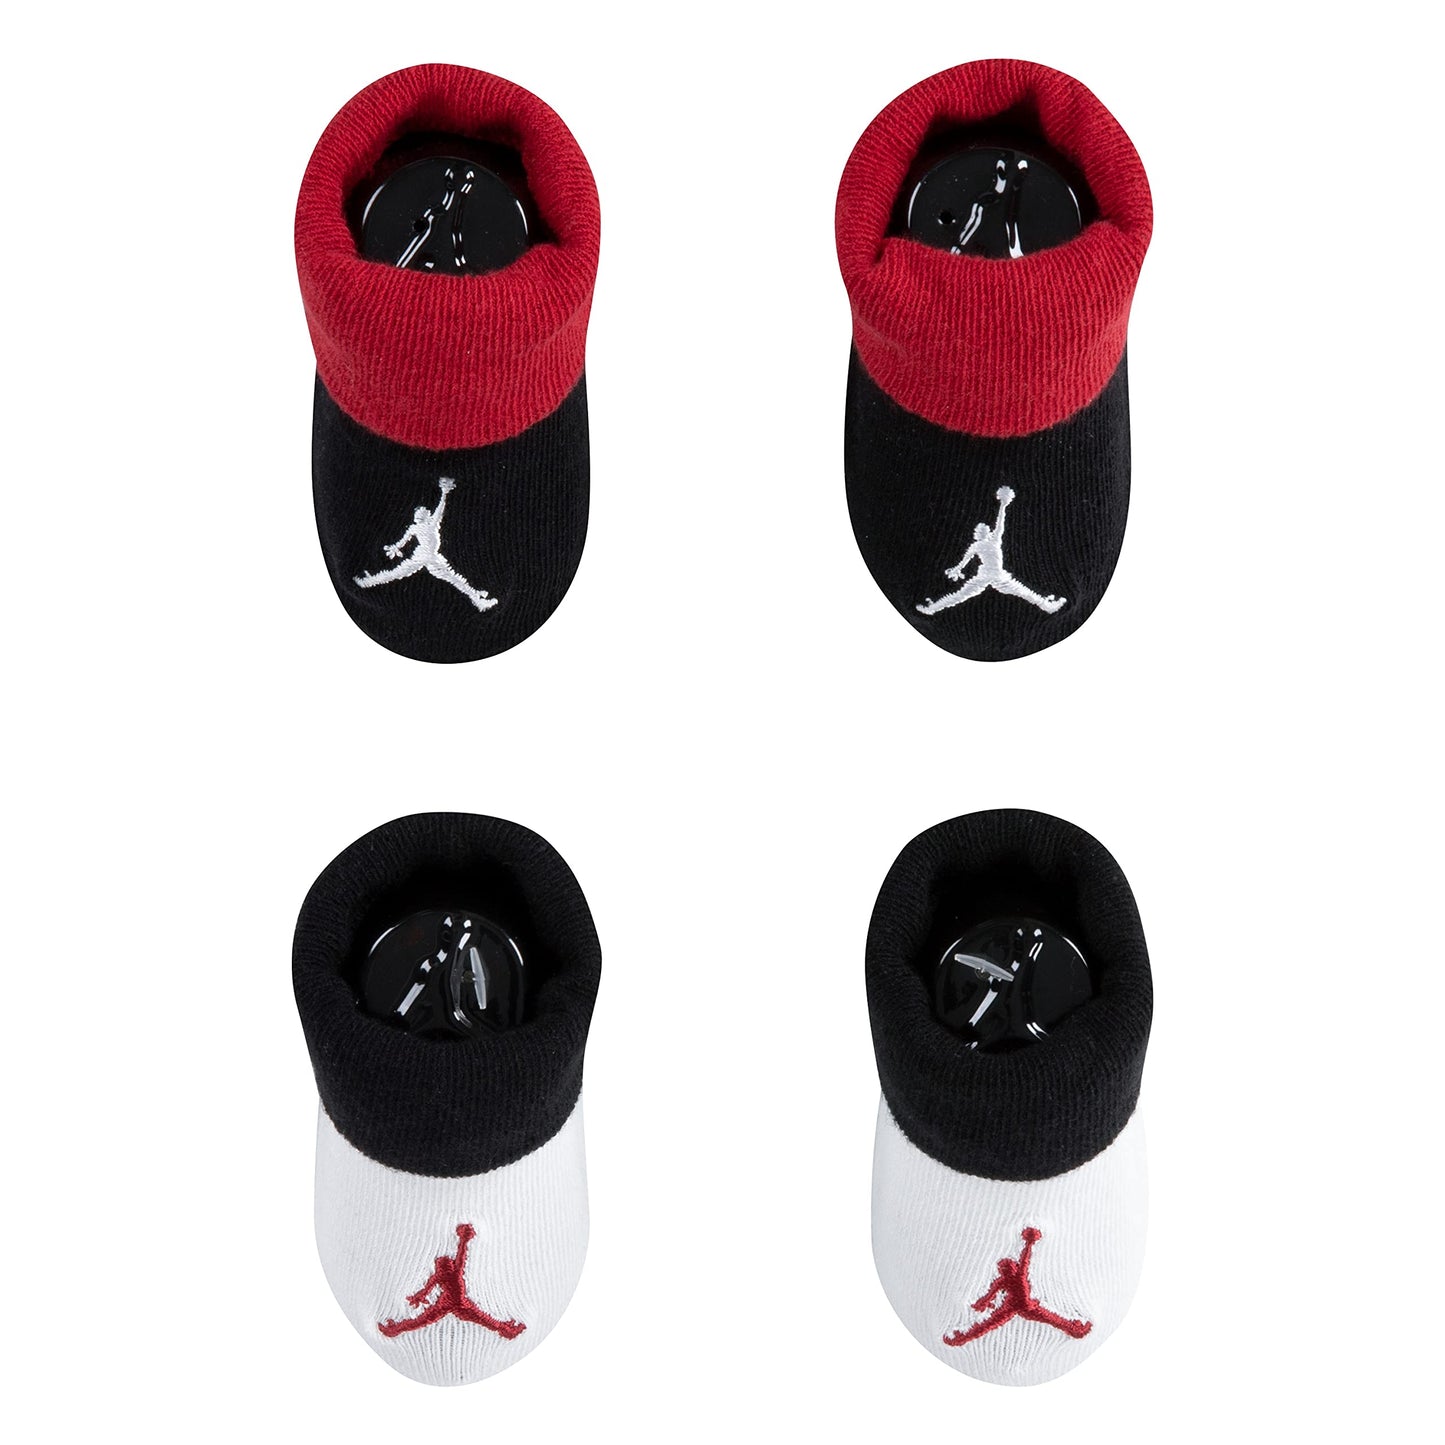 Image 2 of Jumpman Color Blocked Bootie 2-Pack (Infant)